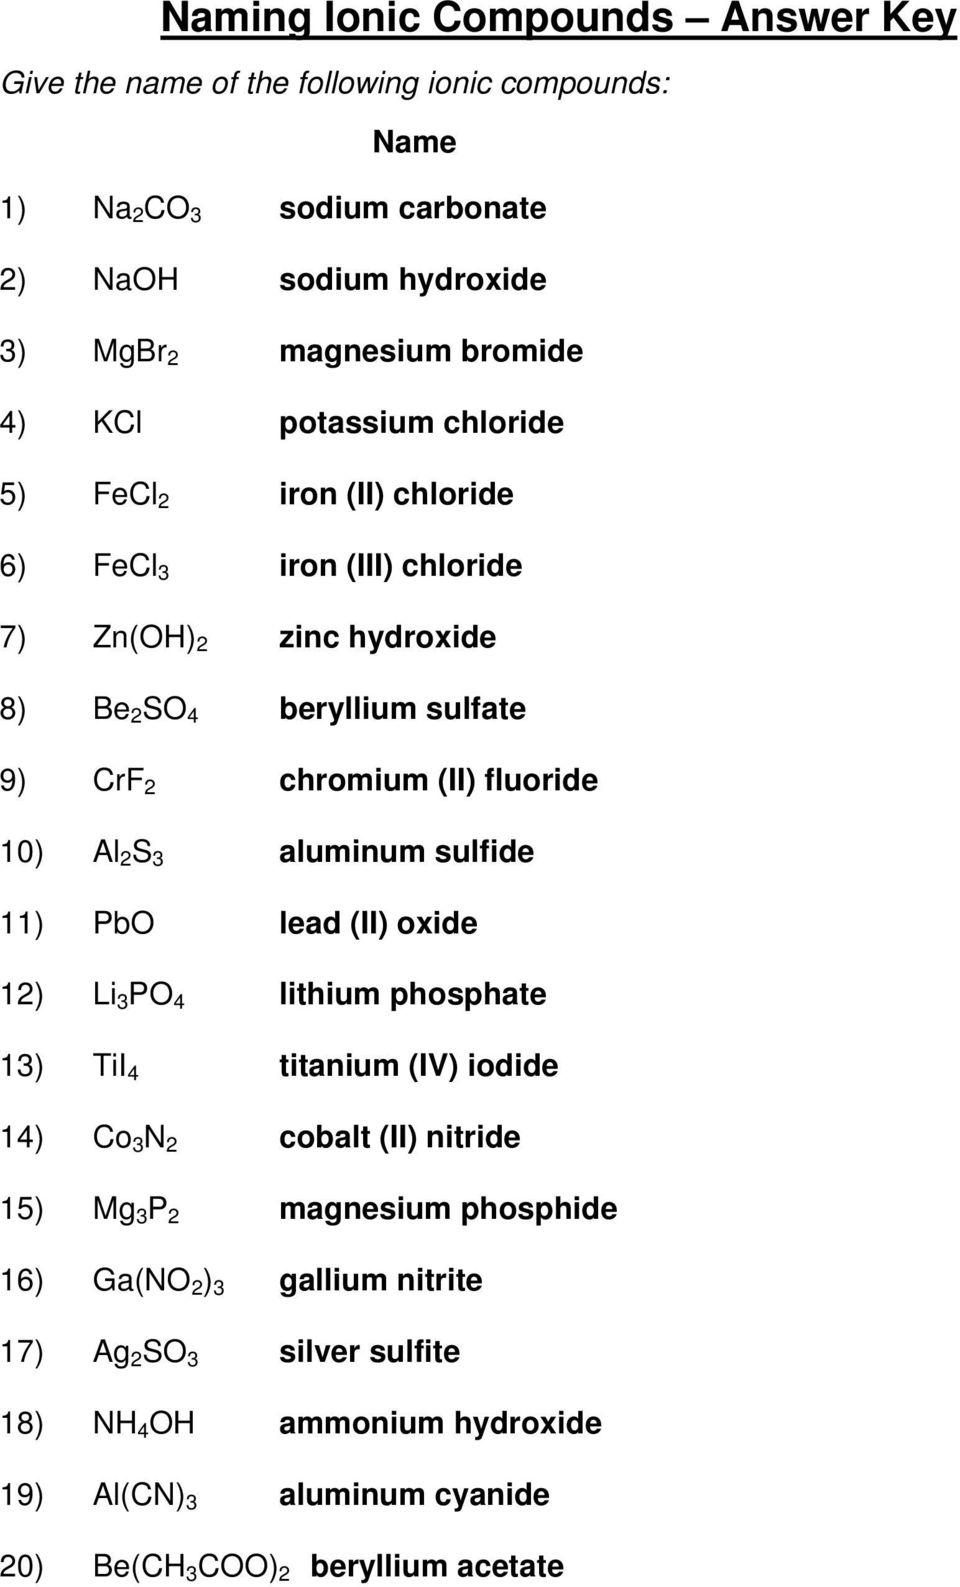 Naming Ionic Compounds Answer Key - PDF Free Download Throughout Naming Chemical Compounds Worksheet Answers